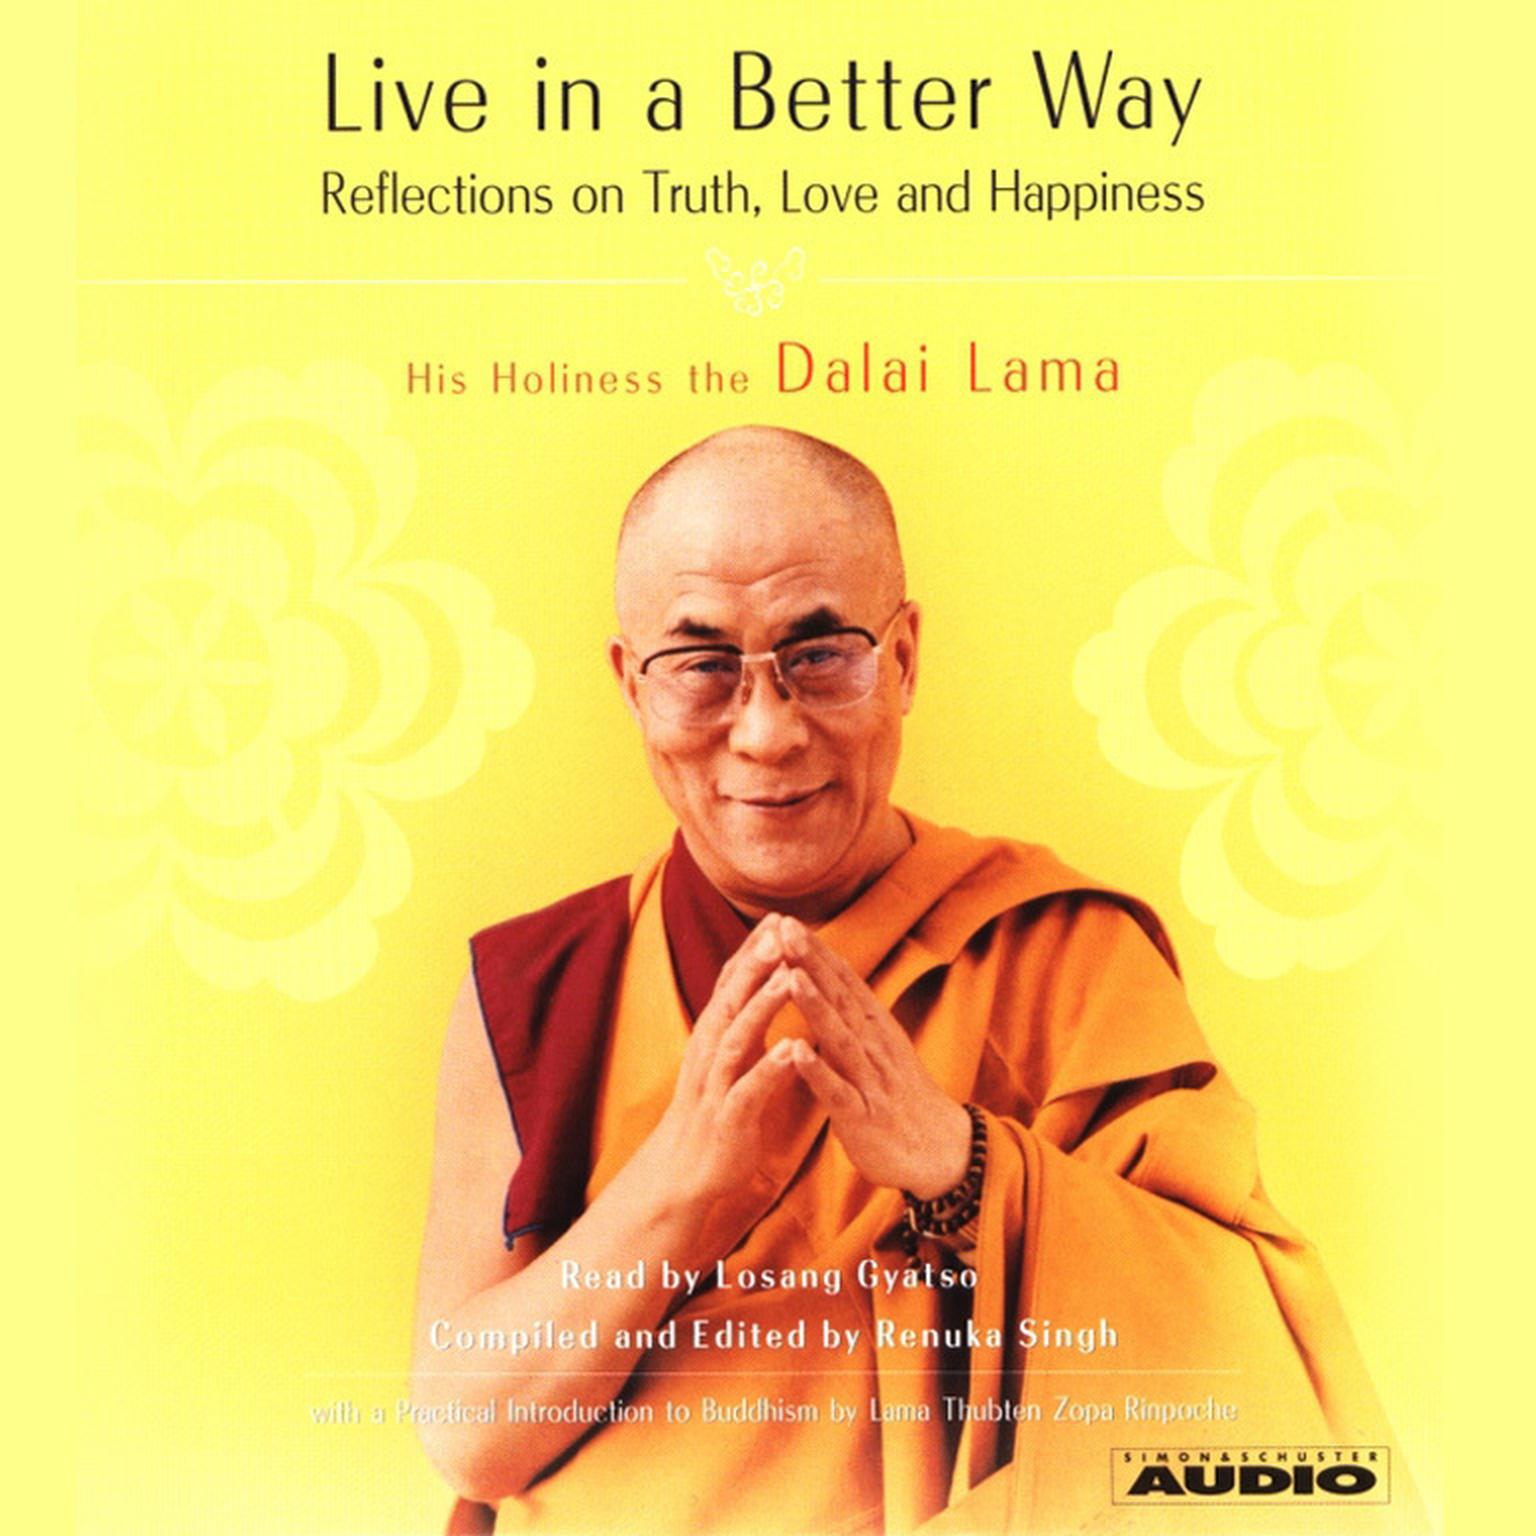 Live in a Better Way (Abridged): Reflections on Truth, Love and Happiness Audiobook, by His Holiness the Dalai Lama